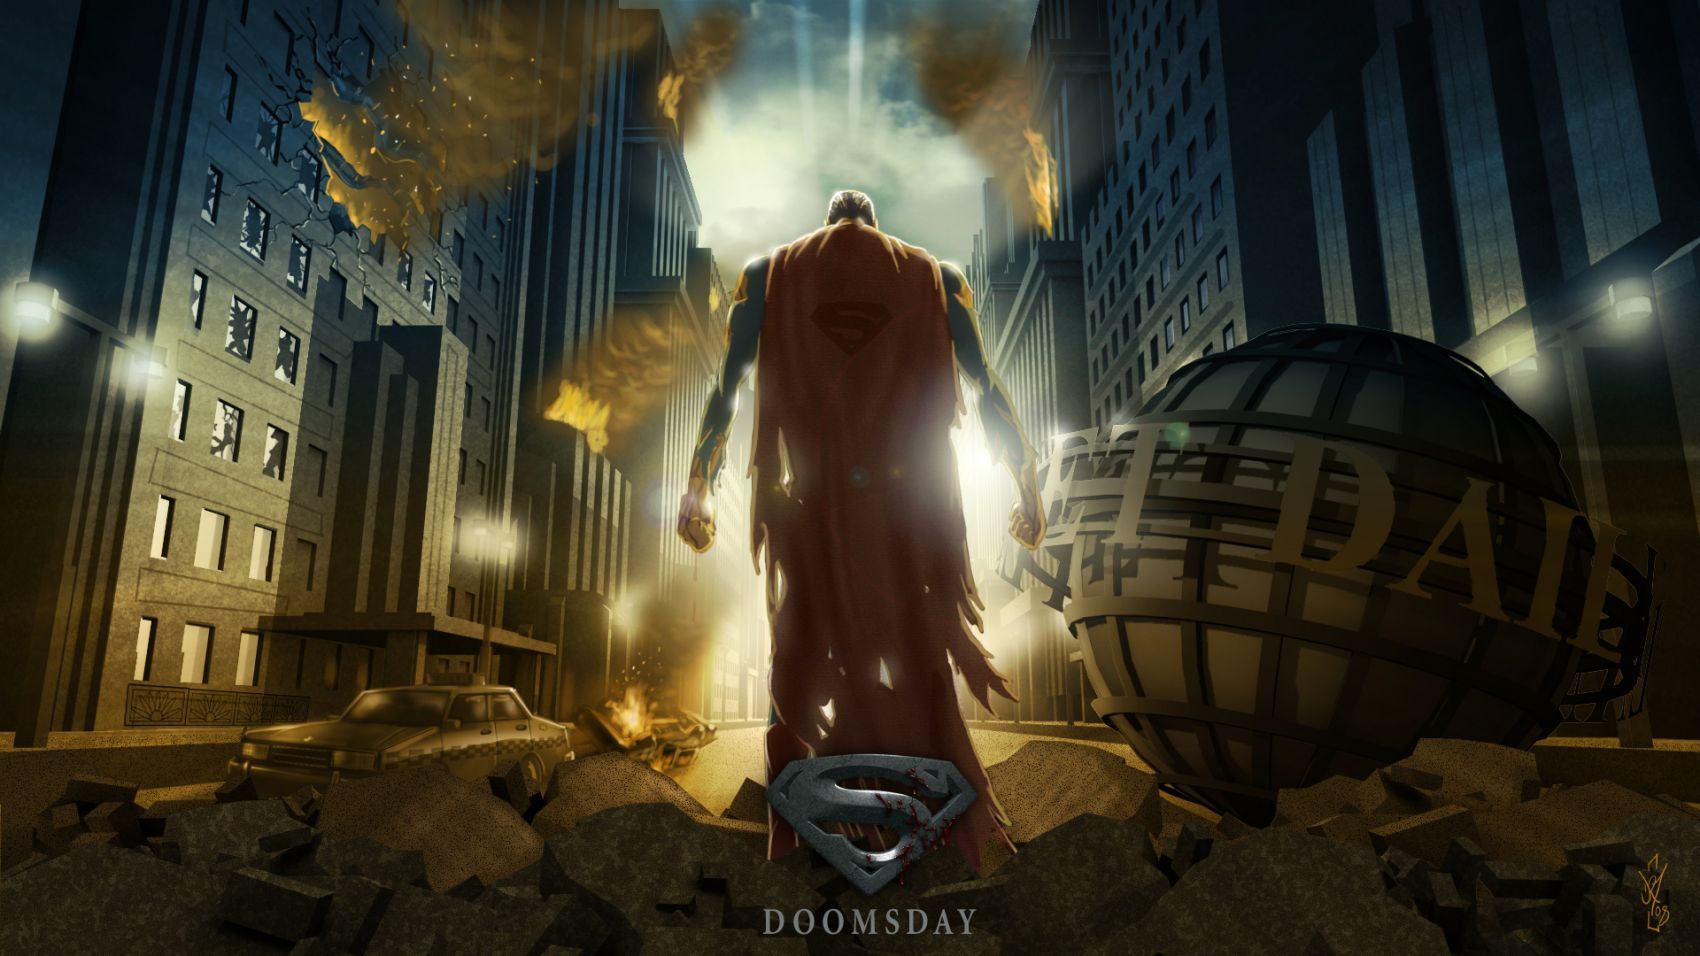 Doomsday Wallpapers, Hd Images Of Doomsday, Ultra Hd - Dc Superman Vs Doomsday , HD Wallpaper & Backgrounds